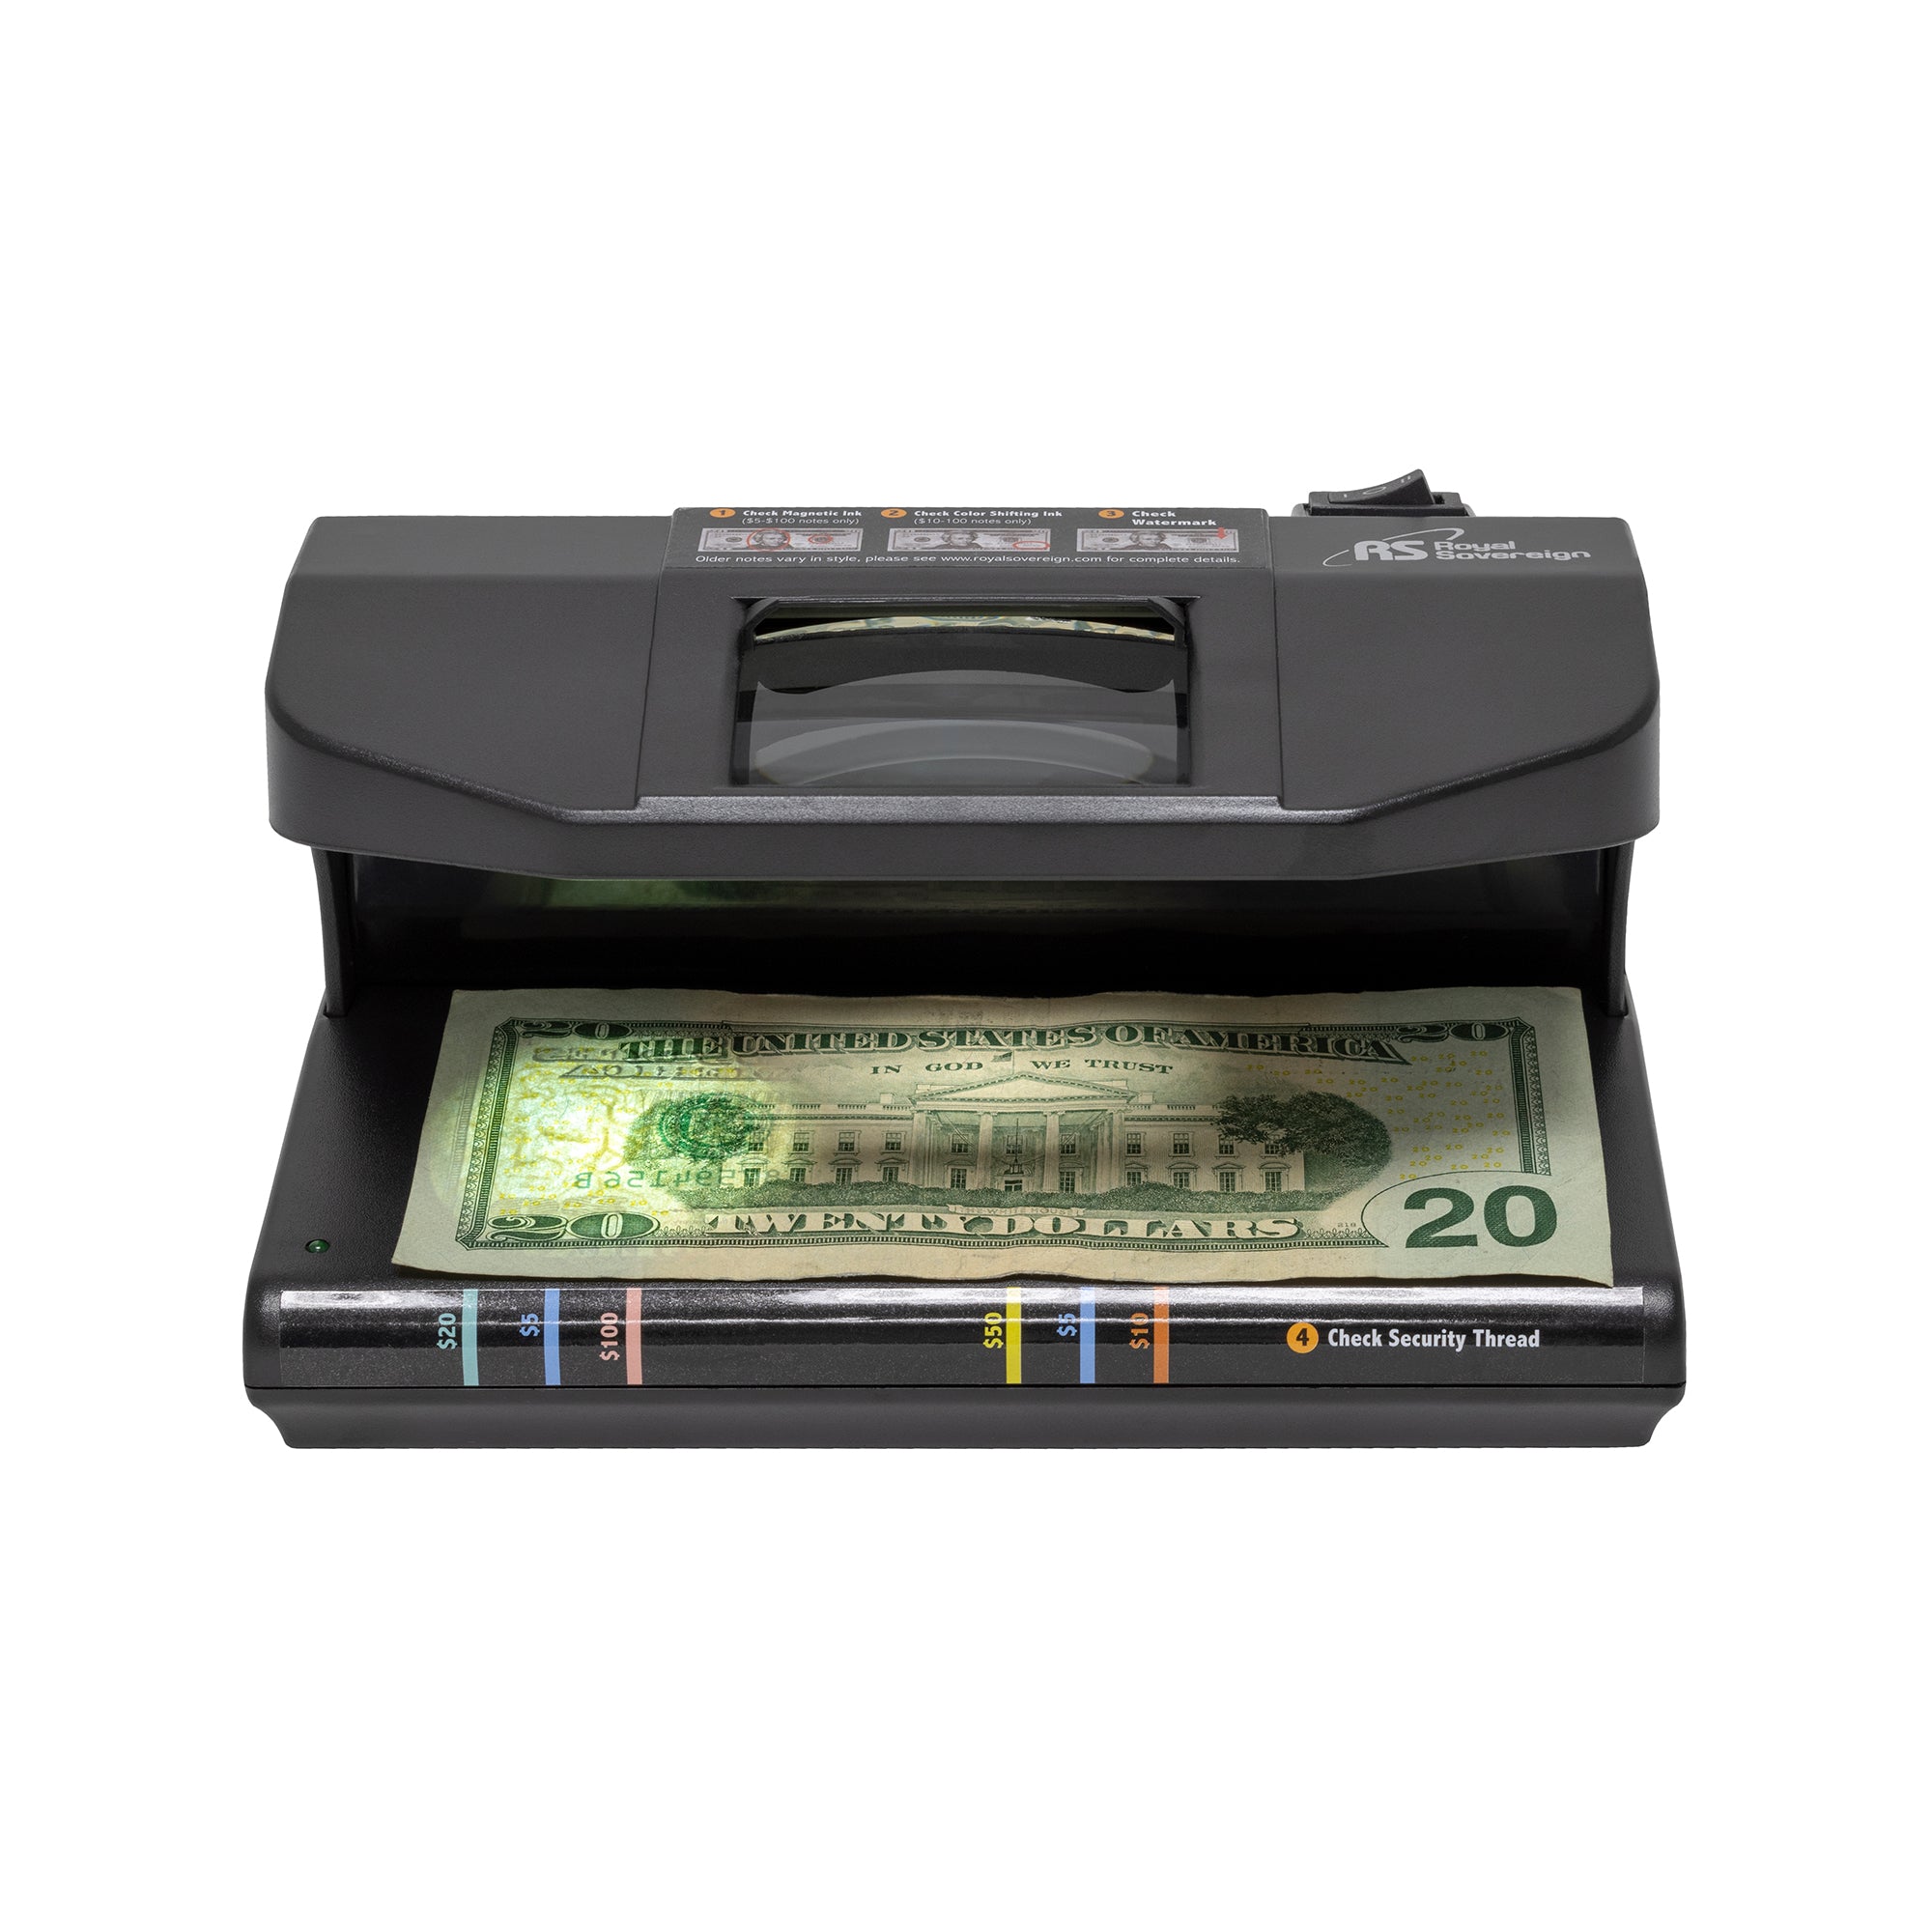 RCD-3000, 4 Way Counterfeit Detector, with Magnifying Lens